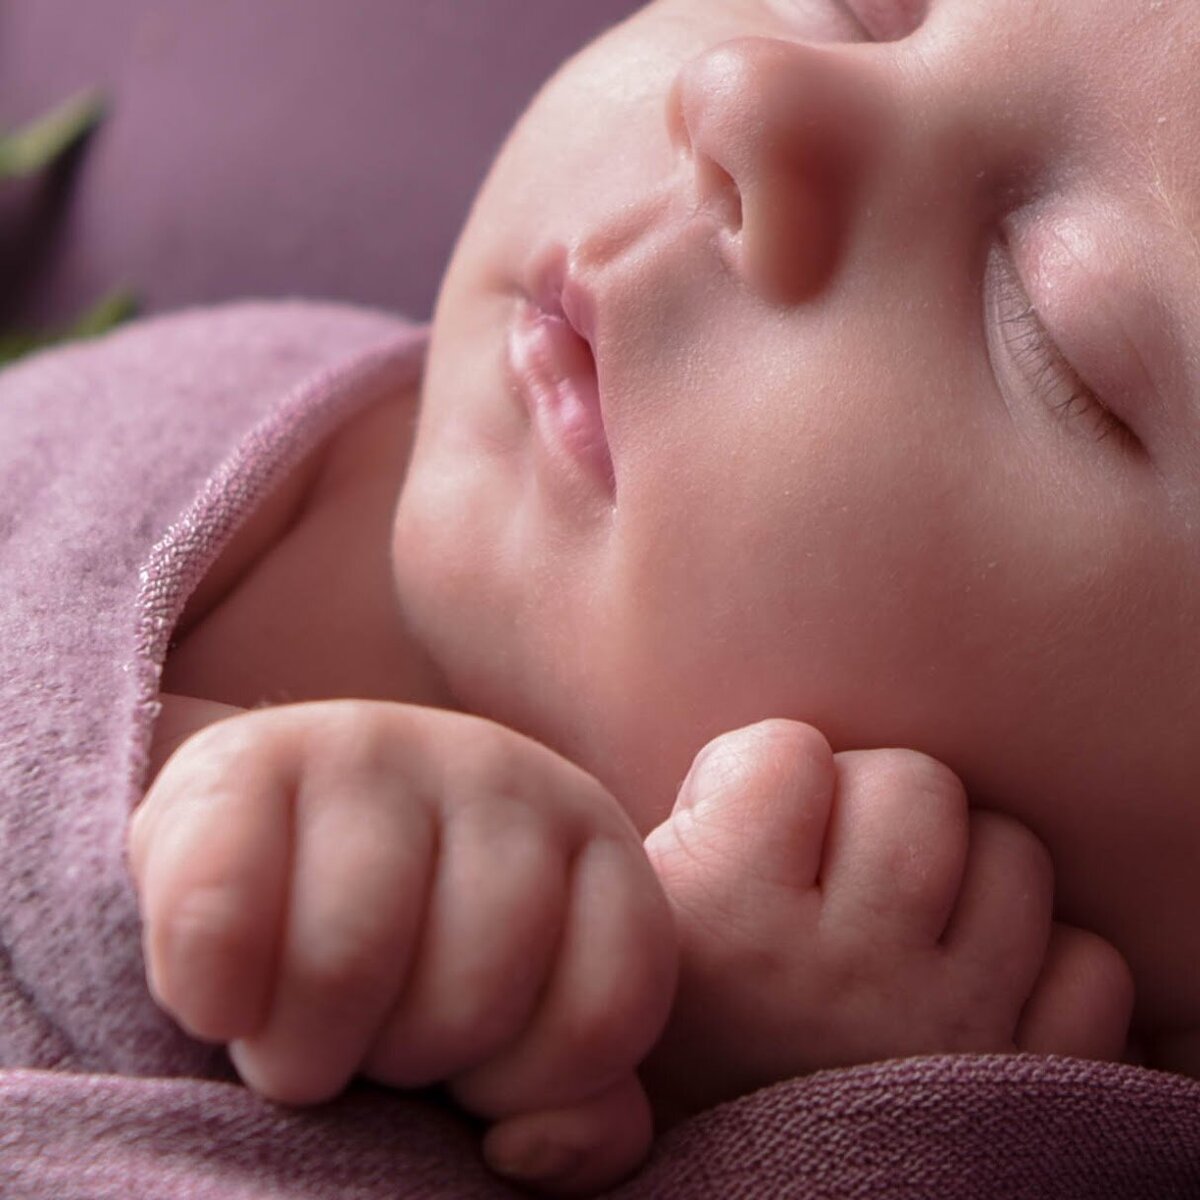 Example of close up newborn baby photography